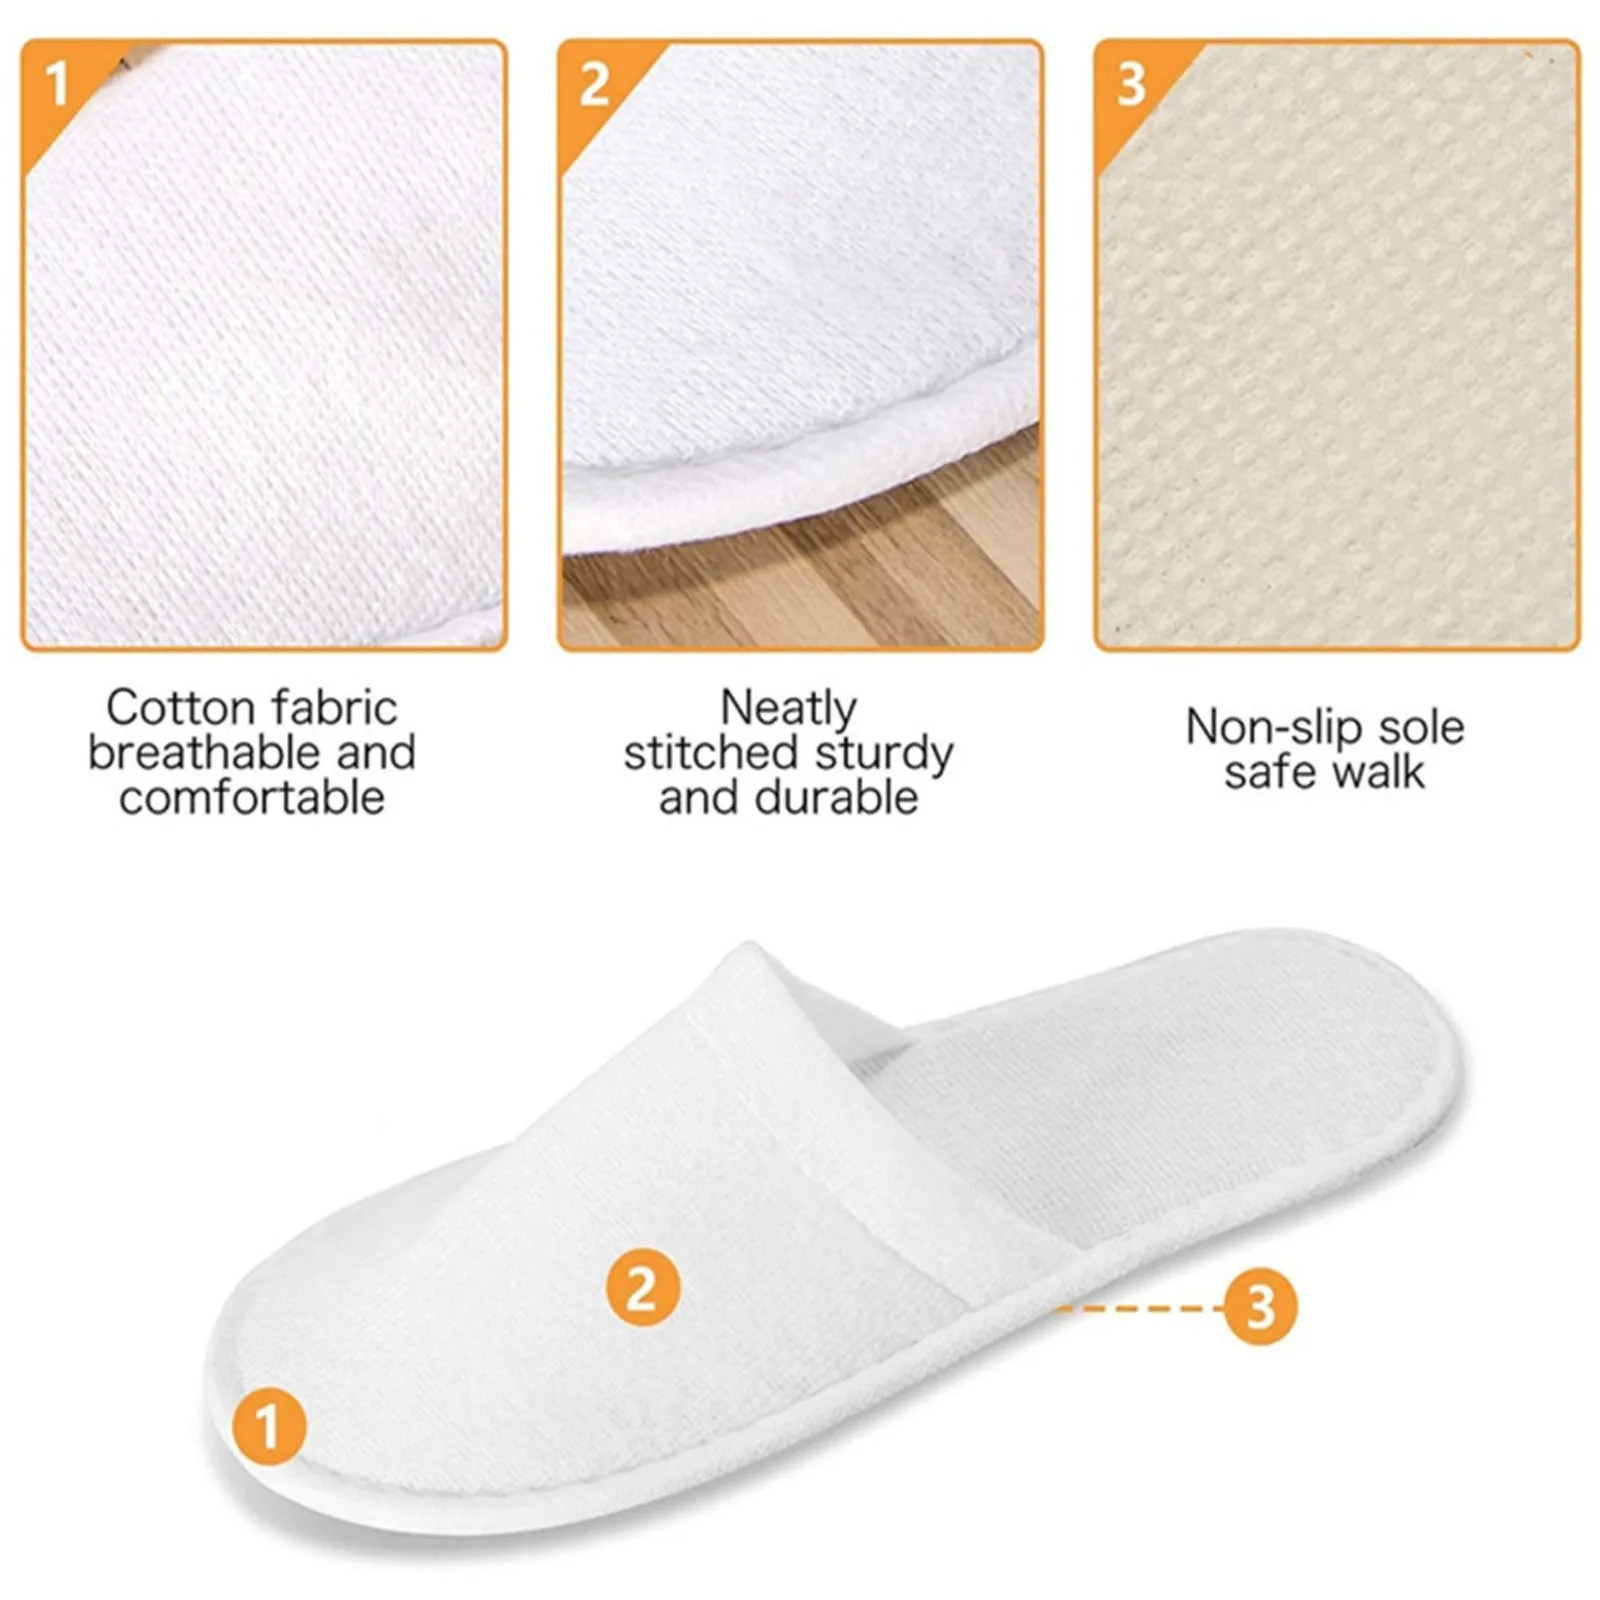 20/40/60 Pairs Spa Slippers for Home Hotel Guests Closed Toe Bathroom Disposable Slippers Non-Slip Slipper Fit Women Men Unisex